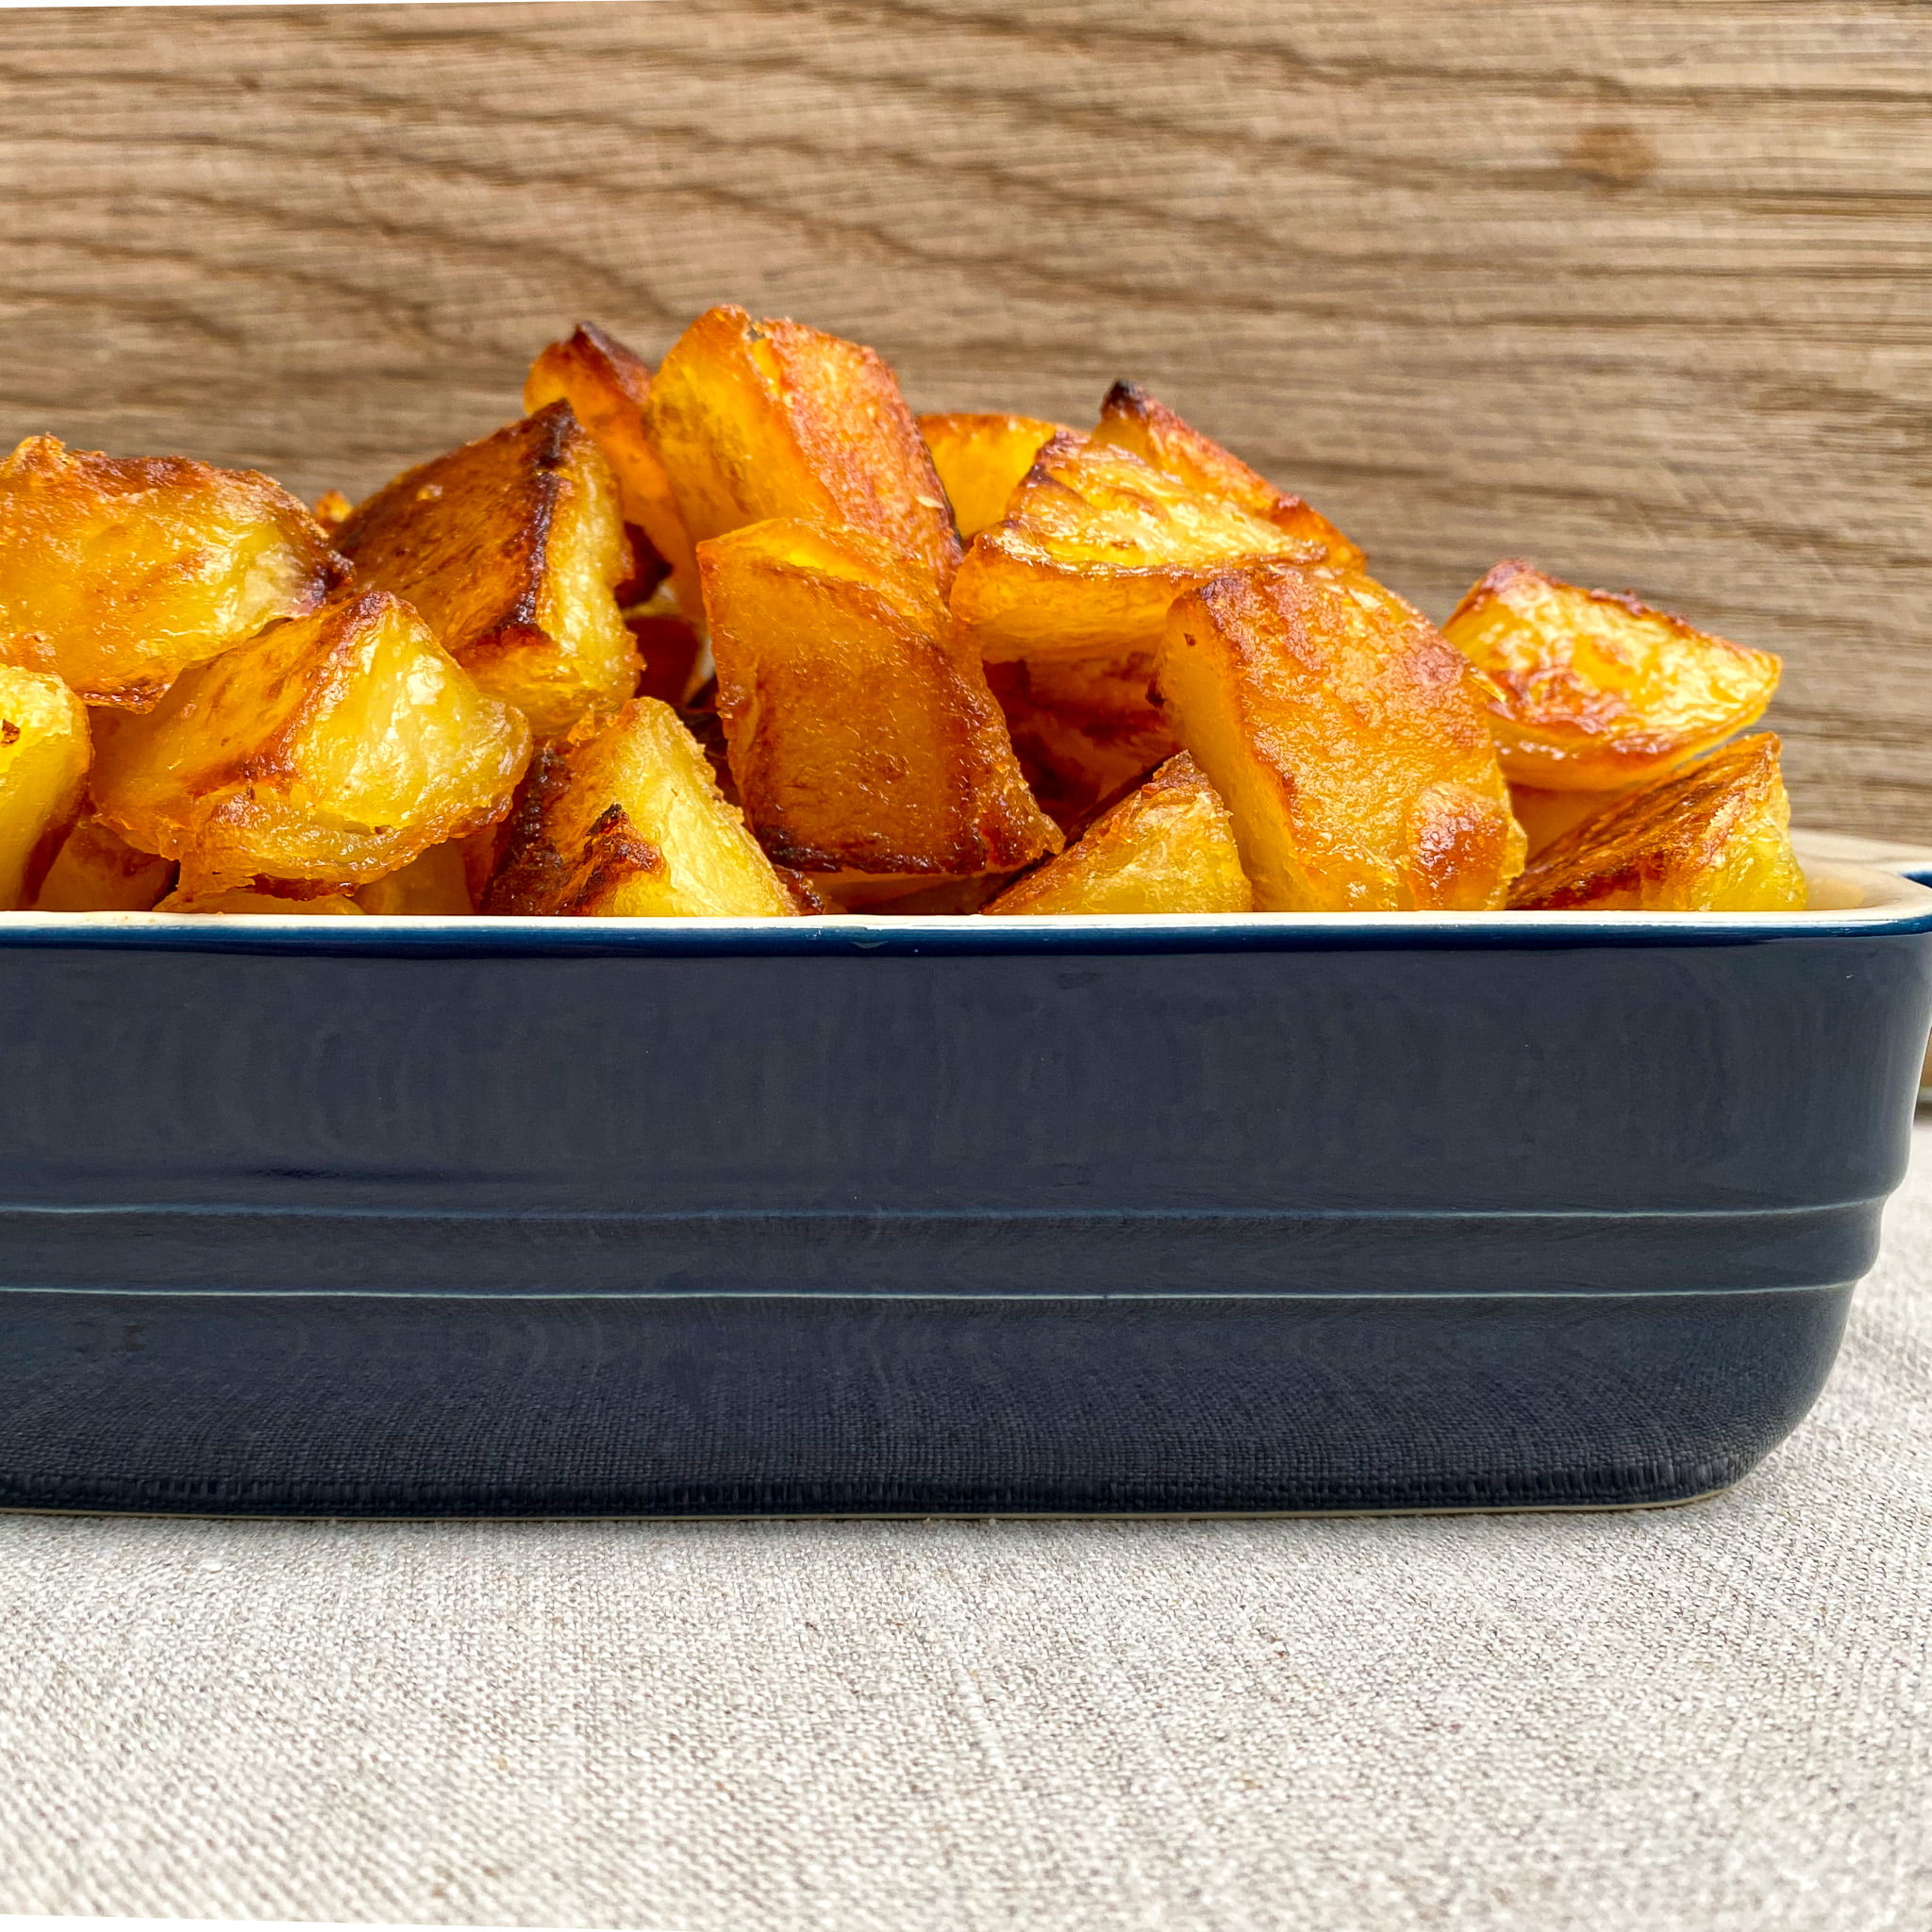 Super crunchy oven roasted potatoes